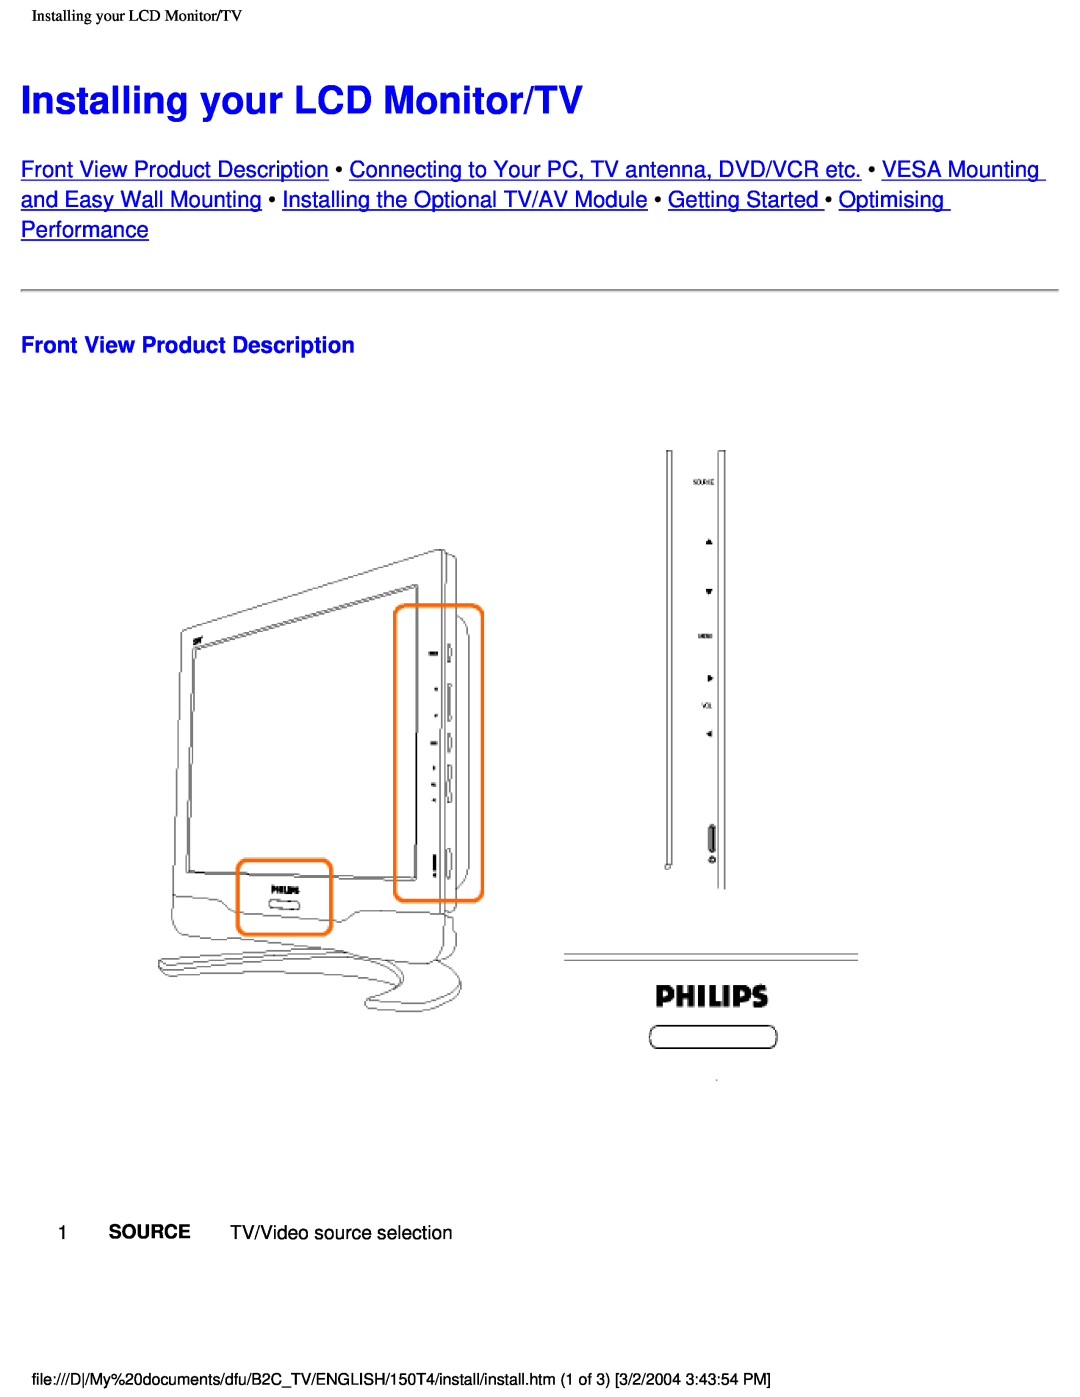 Philips 150T4 manual Installing your LCD Monitor/TV, Front View Product Description 